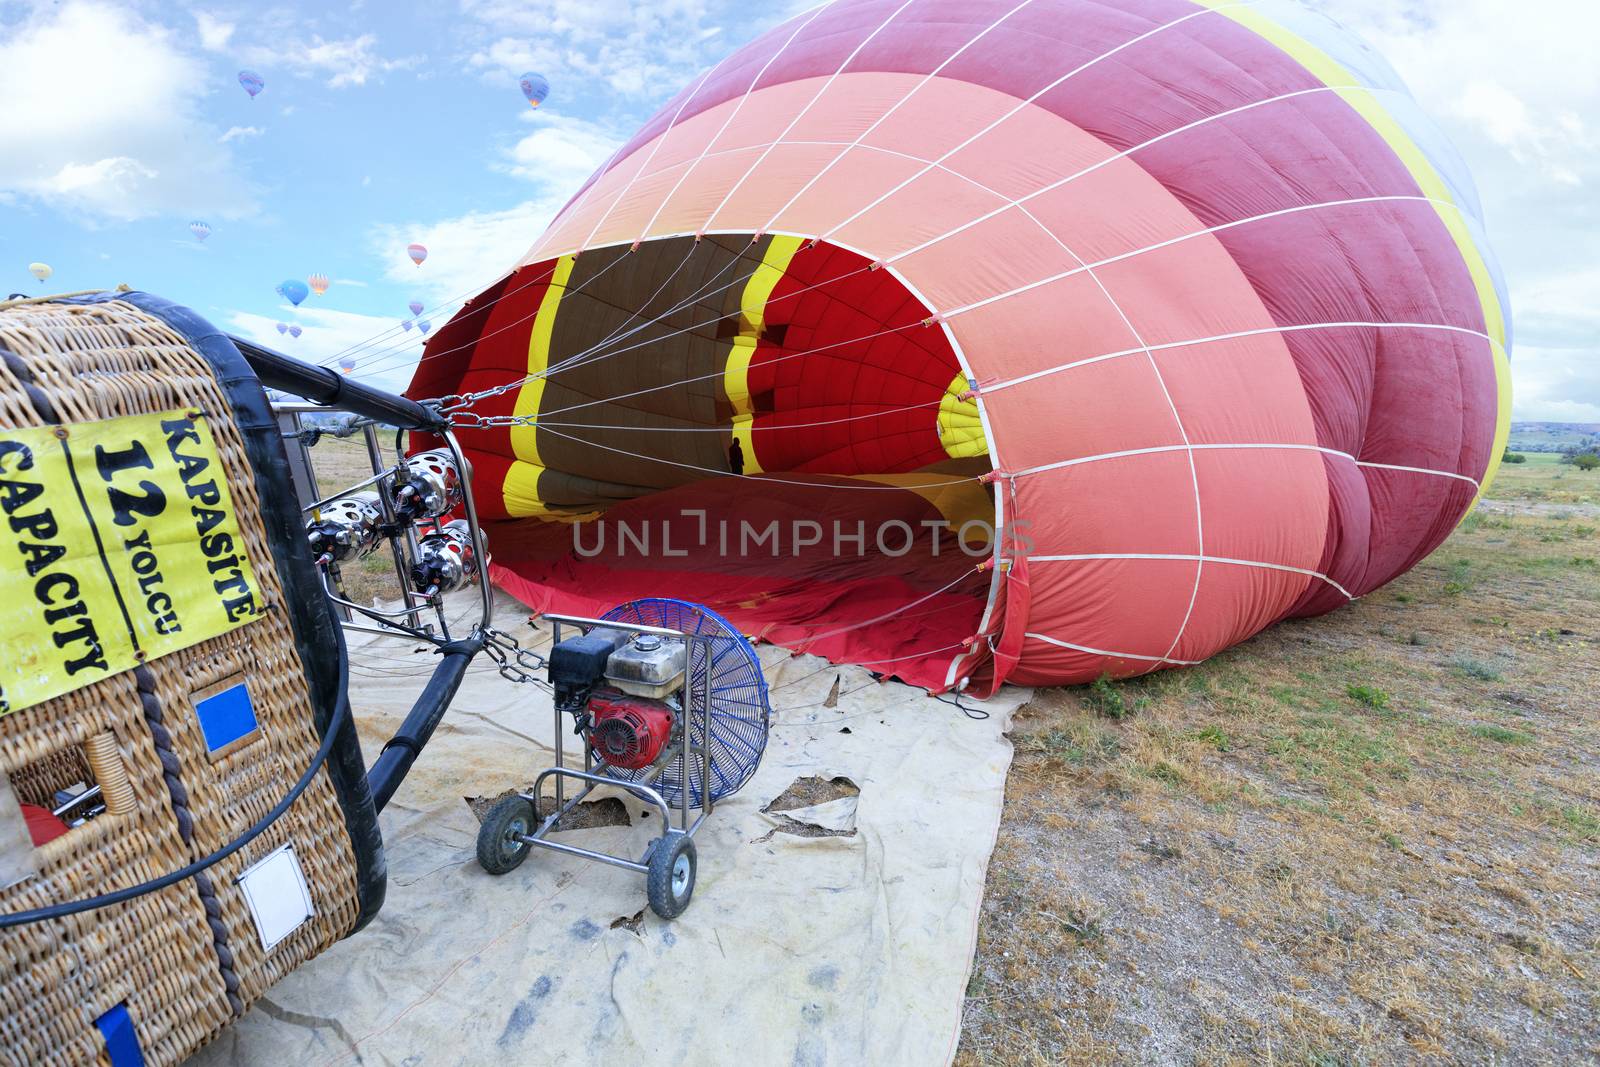 The process of inflating balloons with a gasoline fan and a gas burner. by Sergii